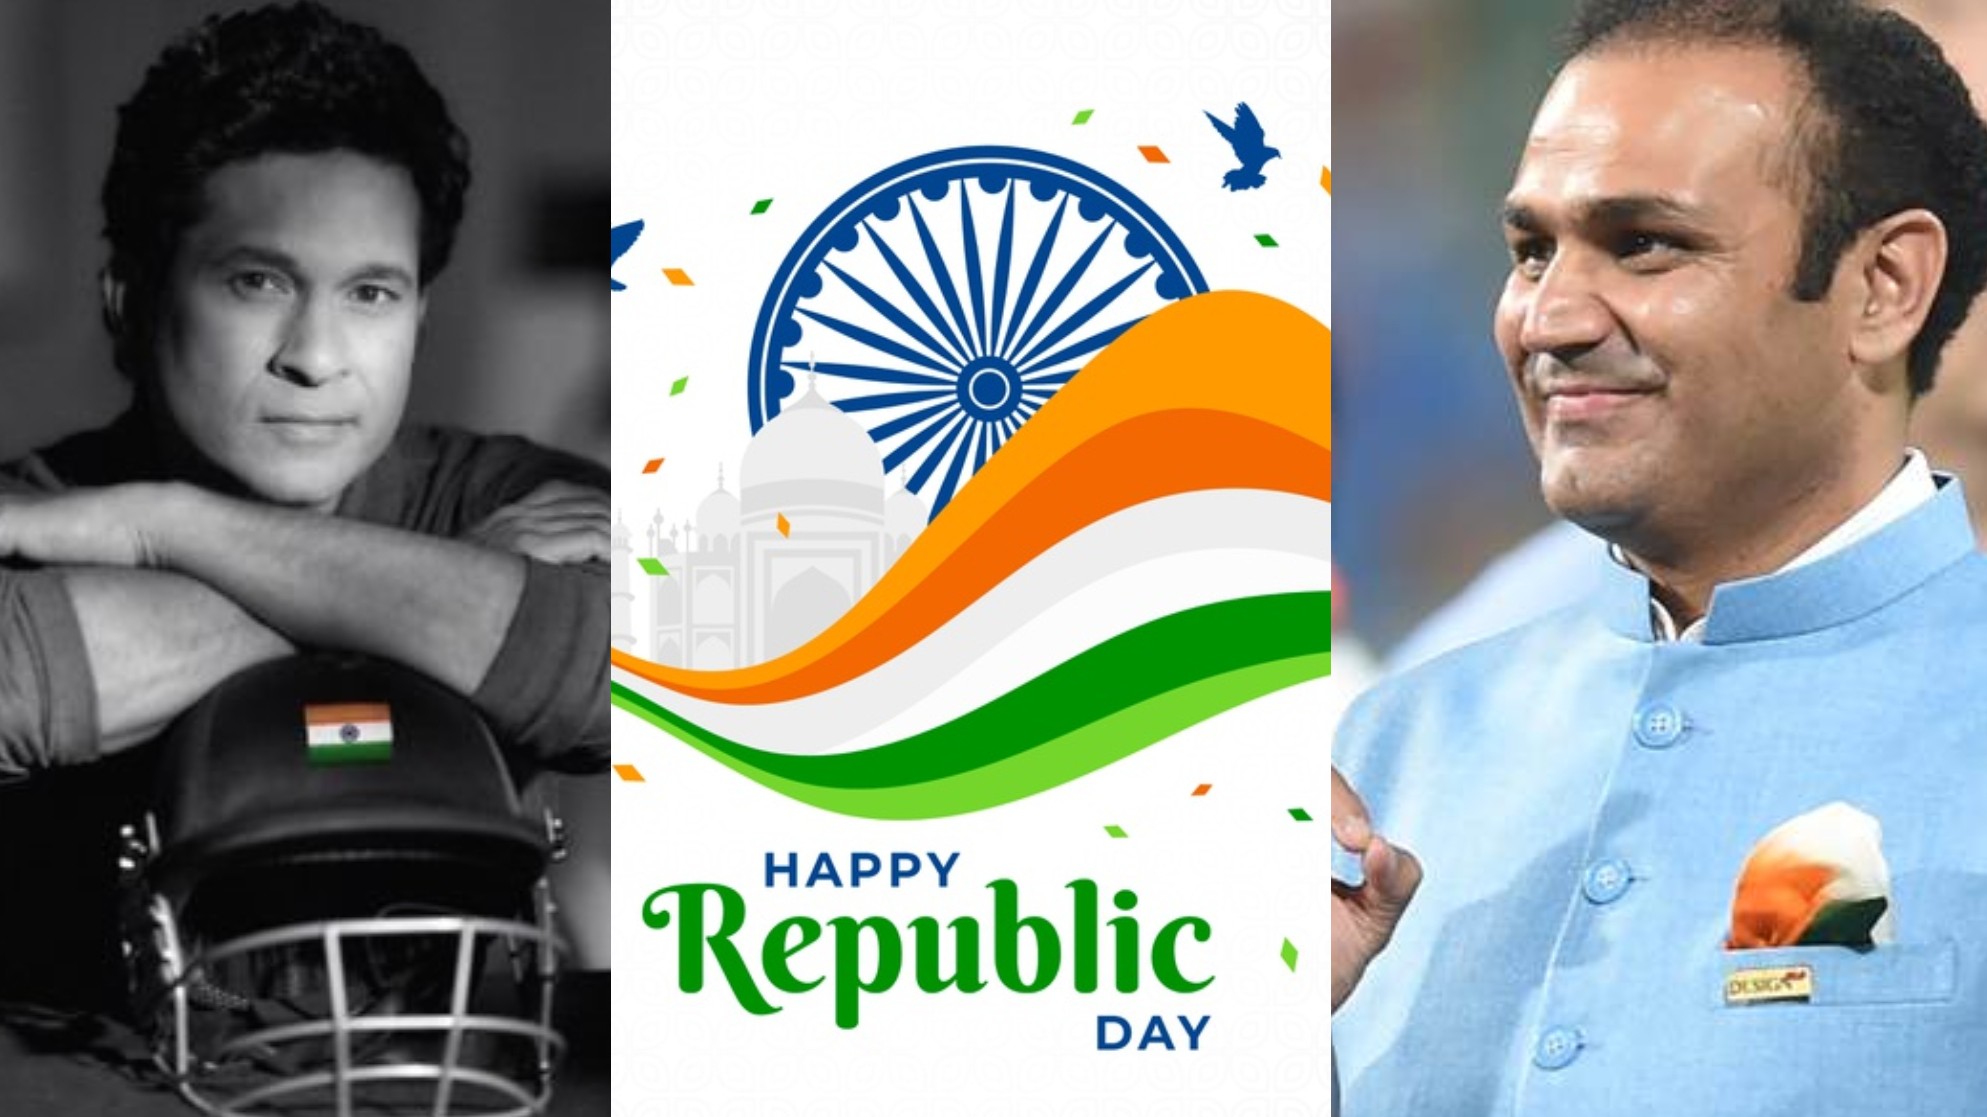 Indian cricket fraternity wishes the country on Republic Day 2021